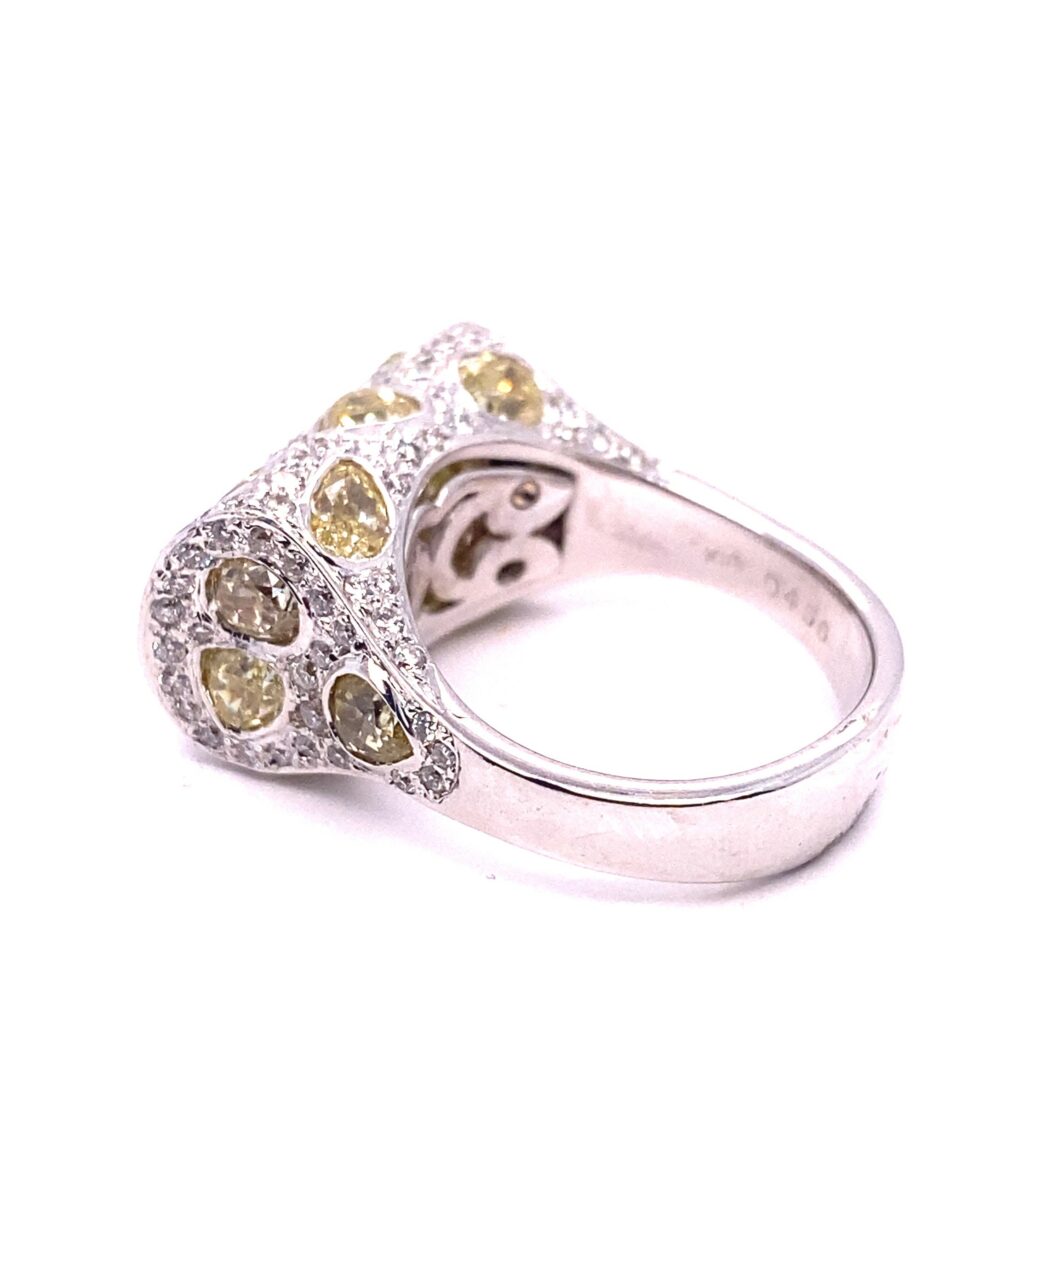 a fancy ring with yellow and white diamonds